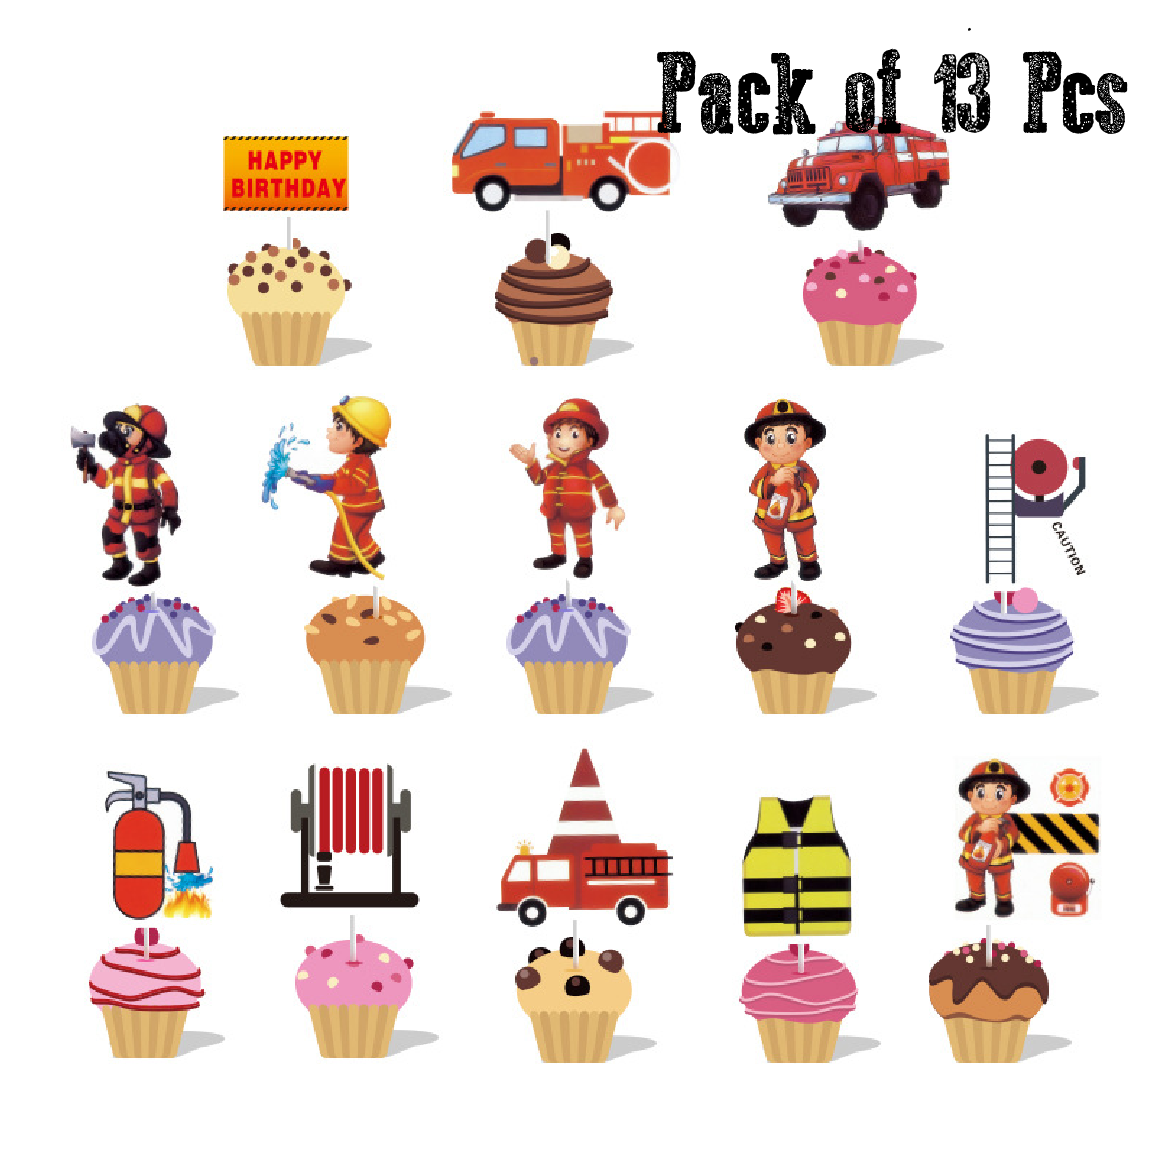 Cupcake Toppers, Cake Decoration - Firefighter, Fire truck 13pcs